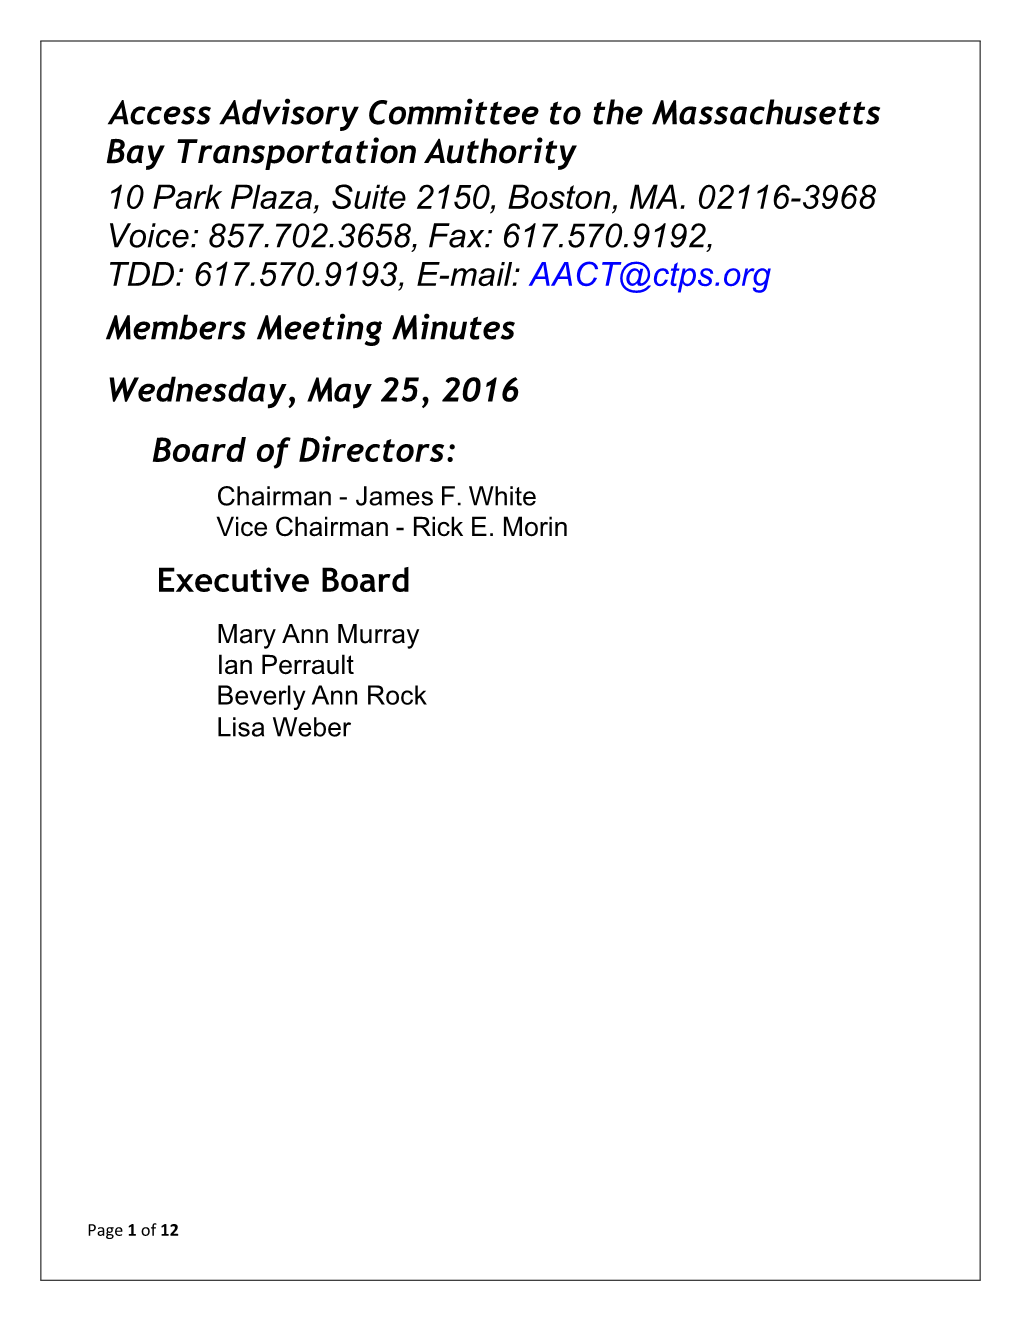 Access Advisory Committee to the MBTA (AACT)